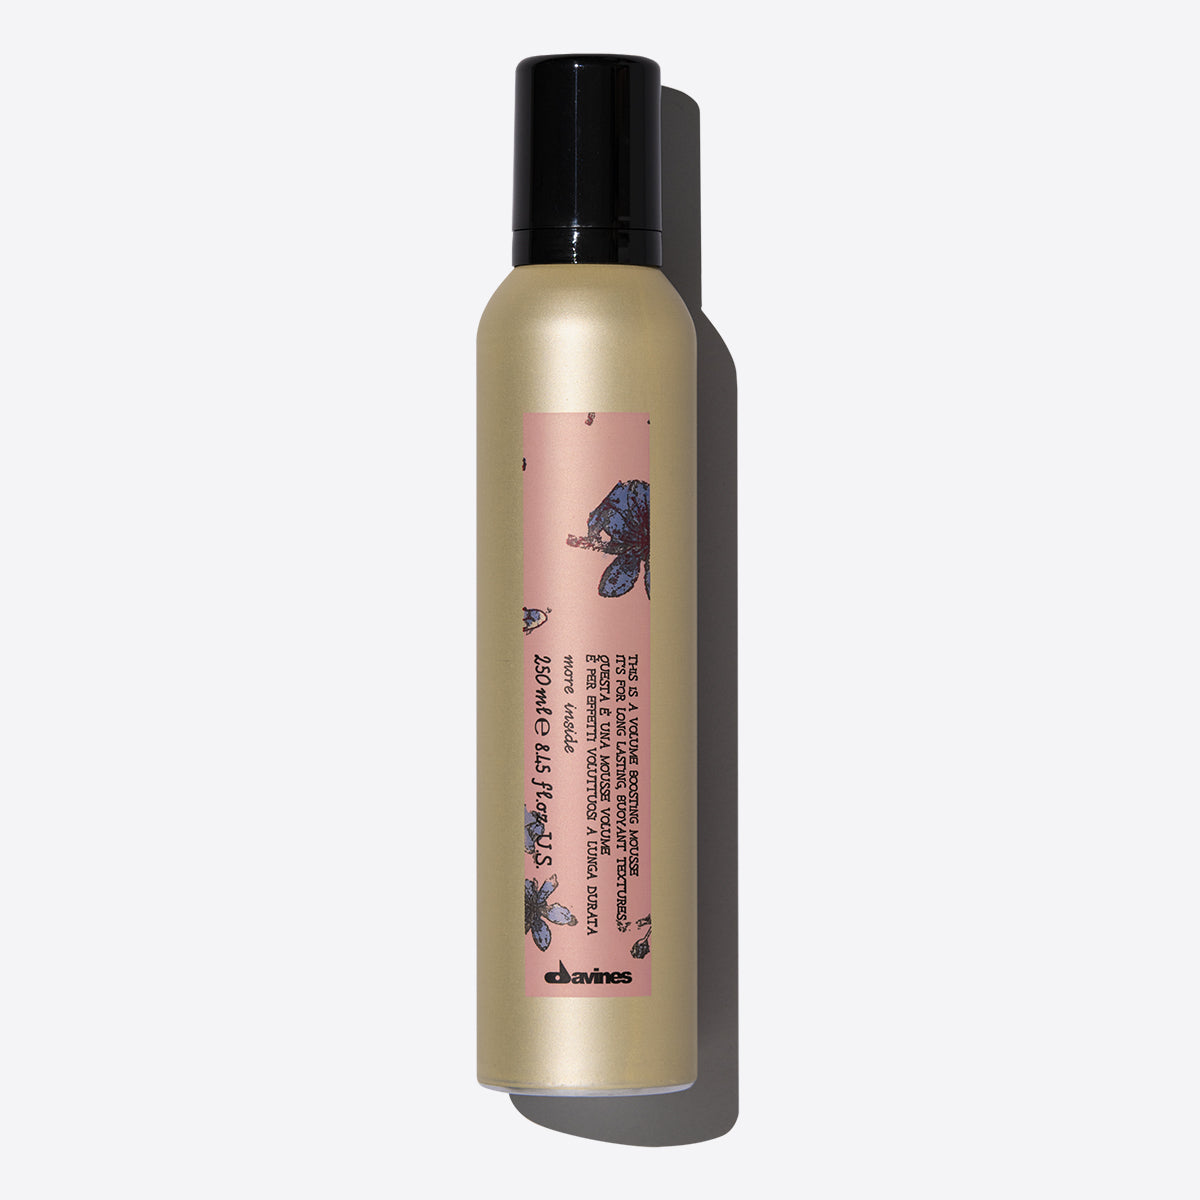 Davines More Inside This is a Volume Boosting Mousse 8.45oz